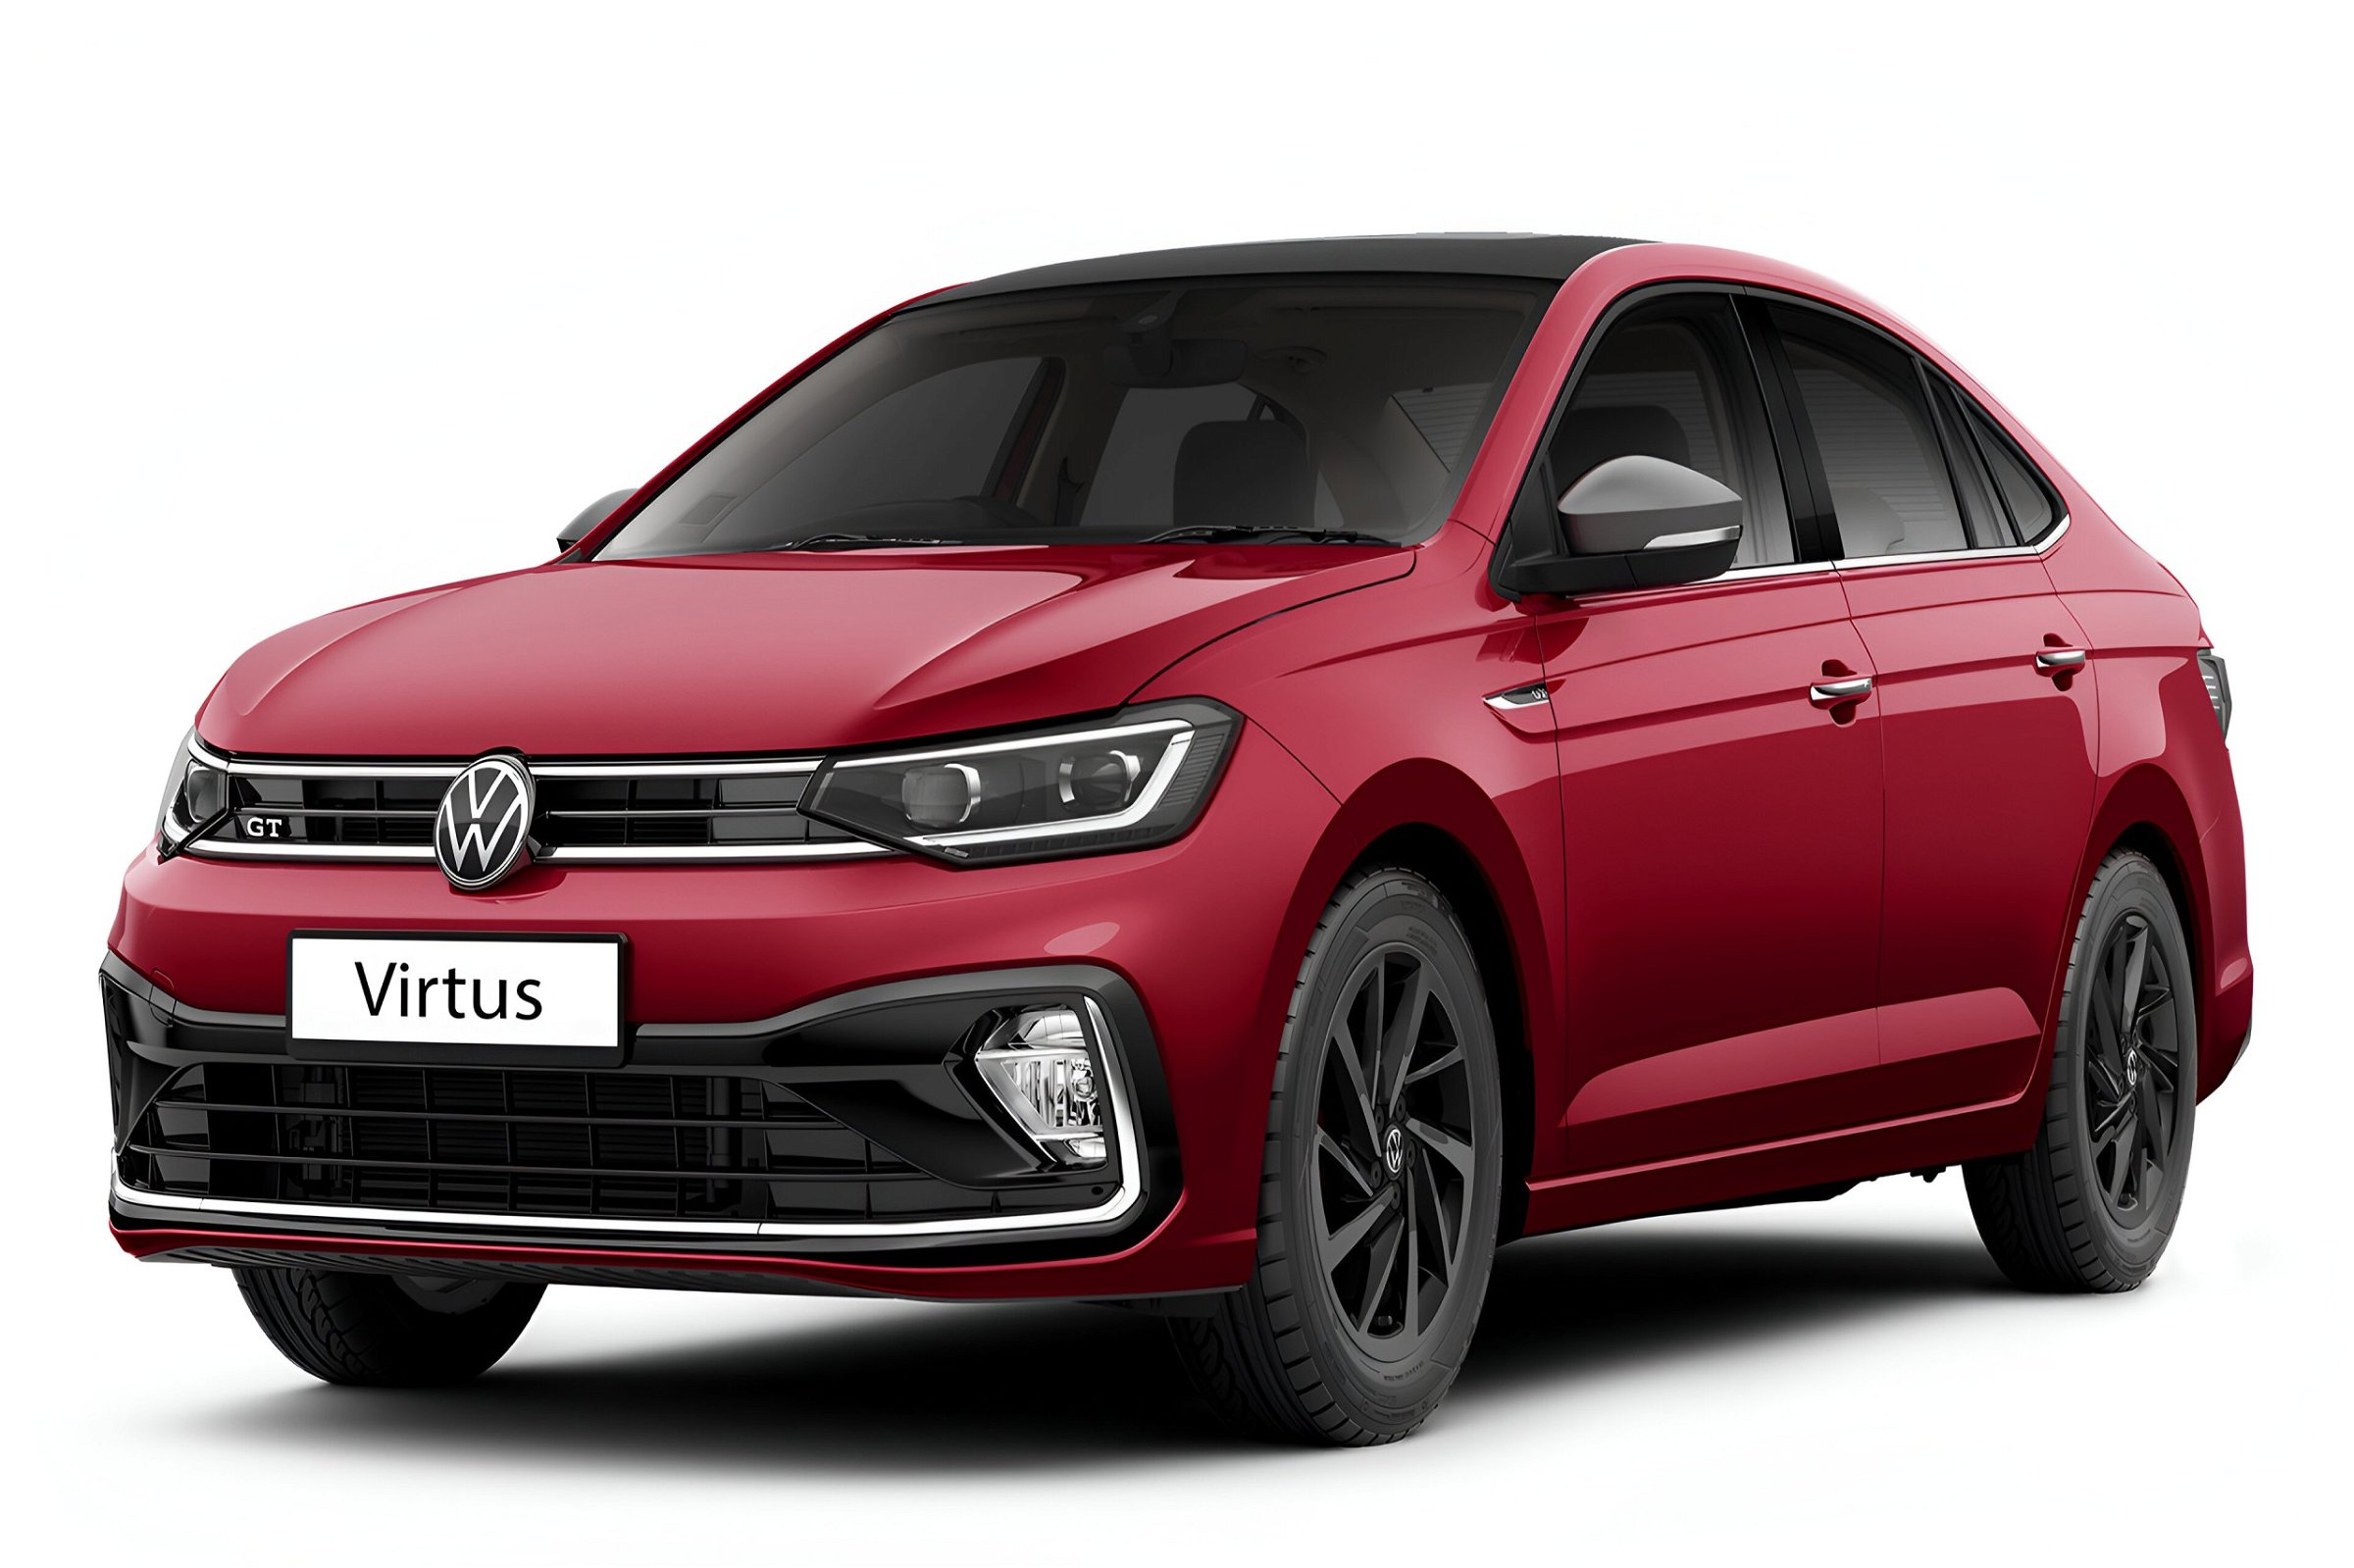 Volkswagen Virtus: What You Should Know